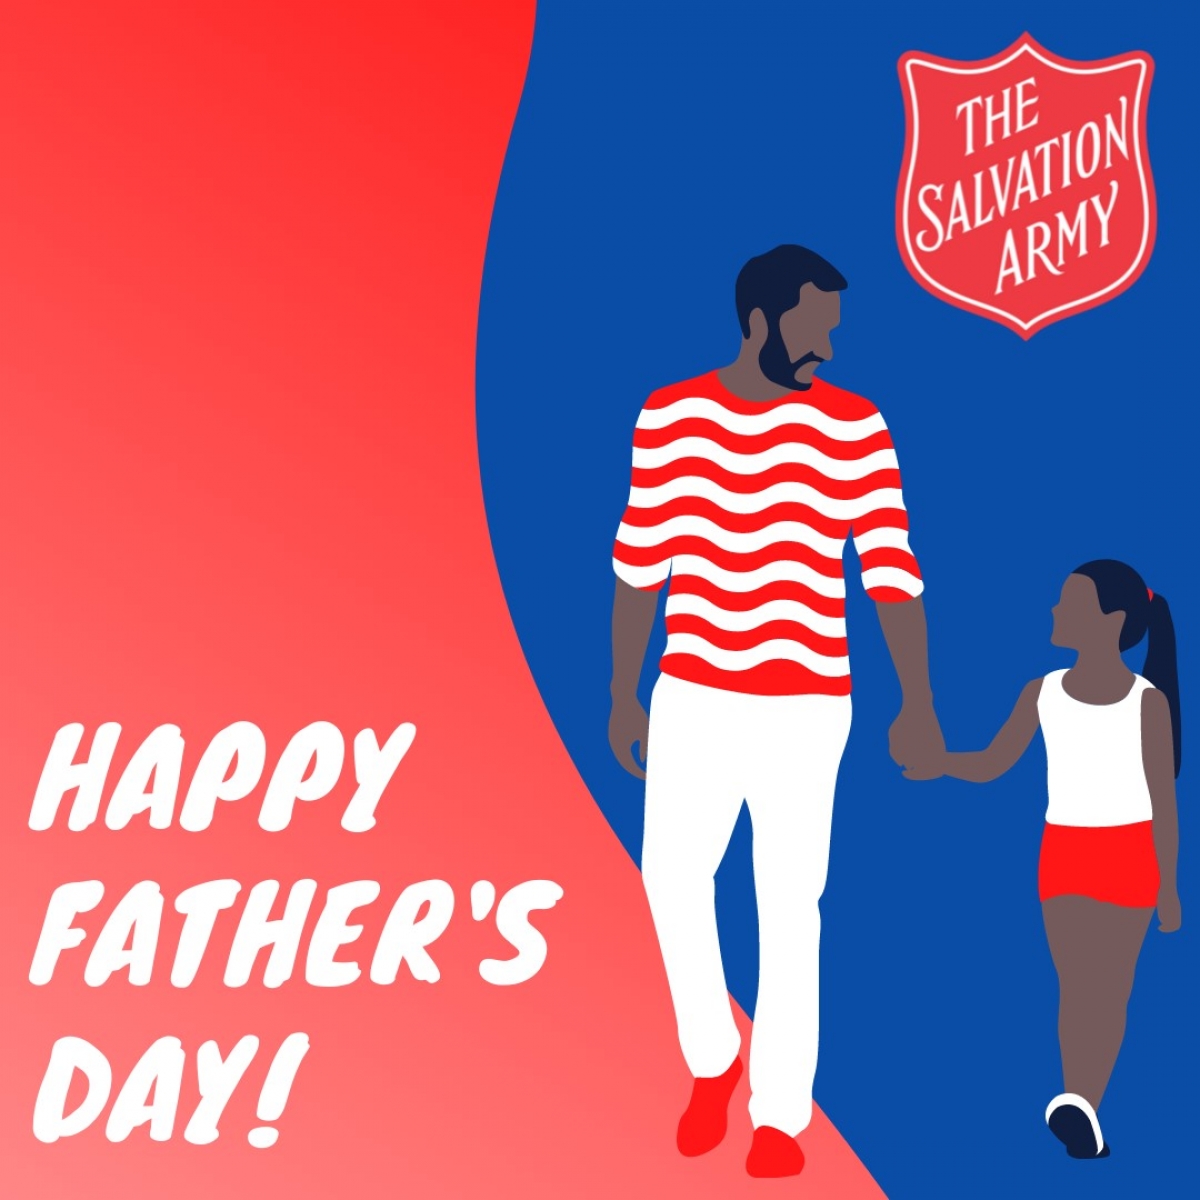 Send e-cards for Father's Day eCards